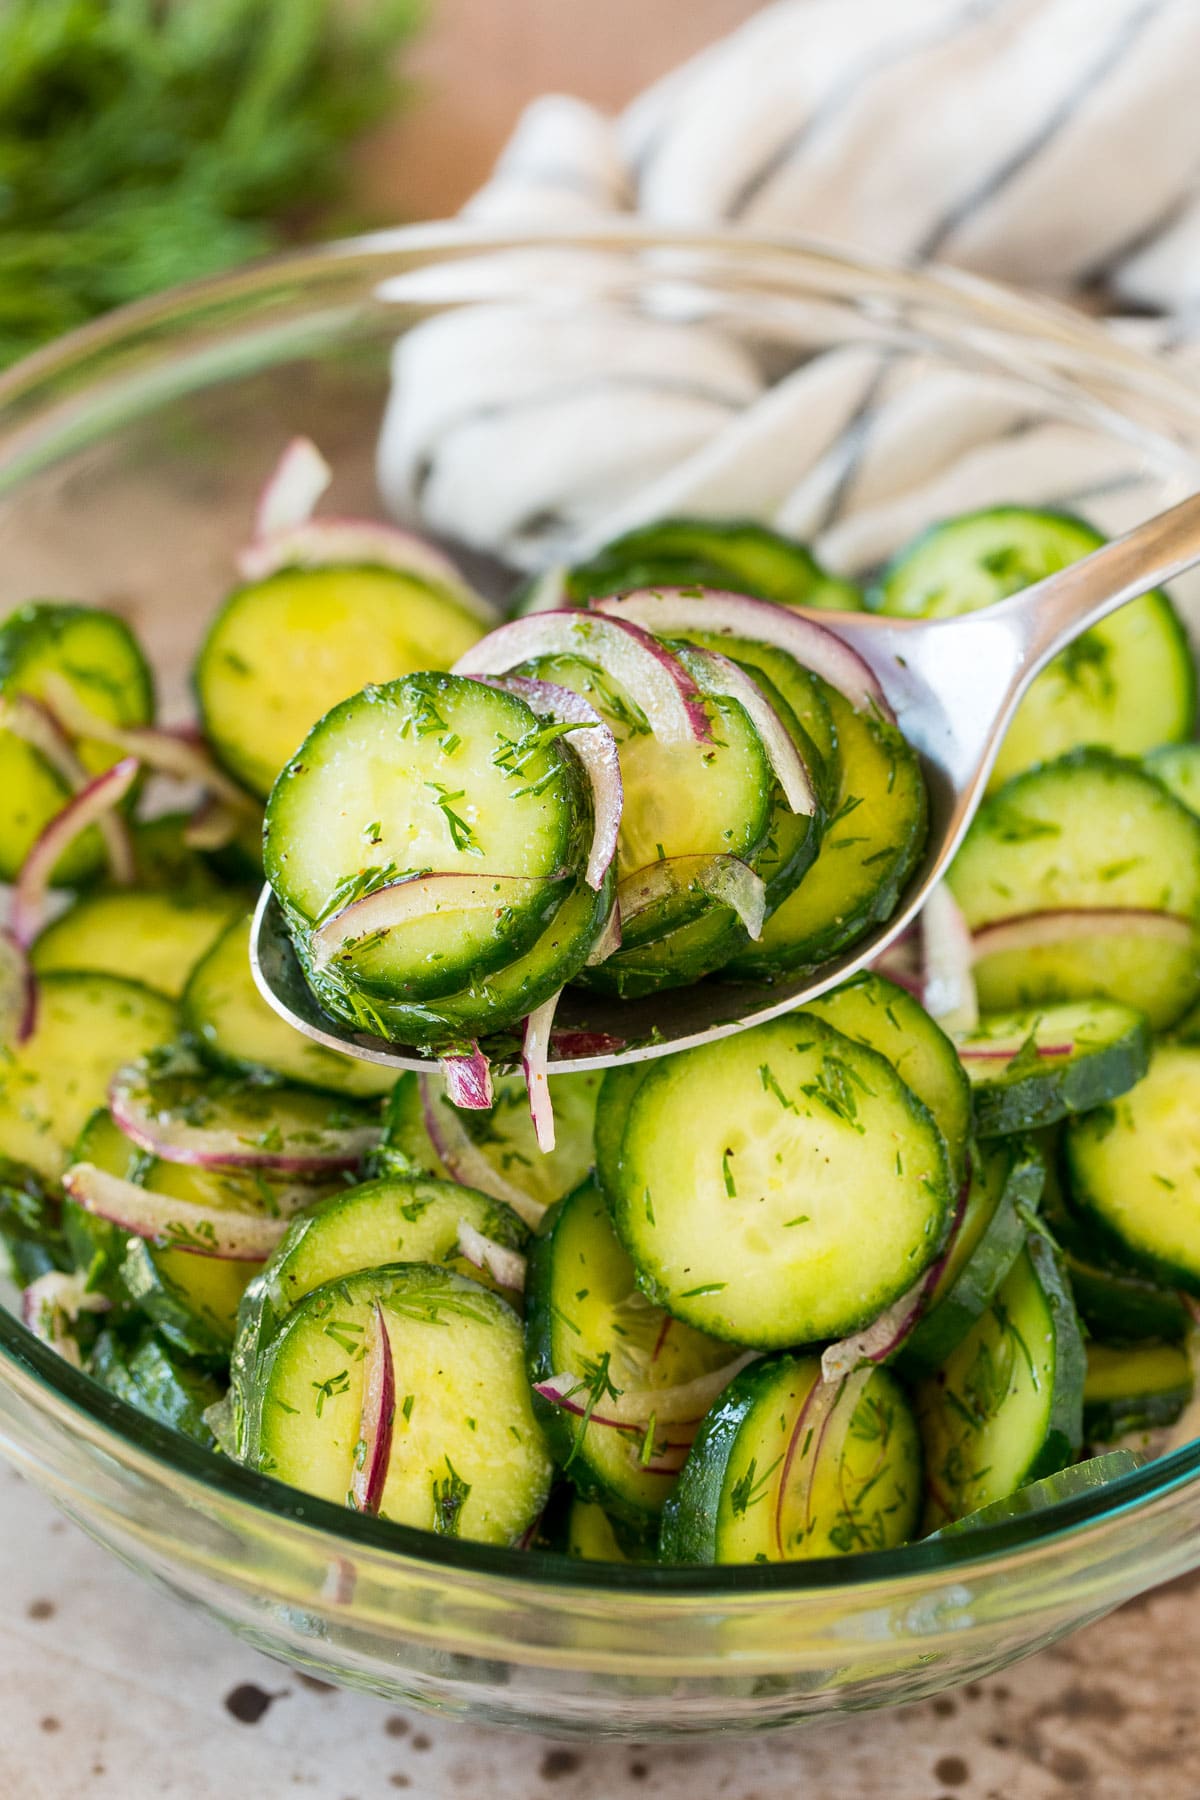 A spoon serving up a portion of cucumber dill salad.